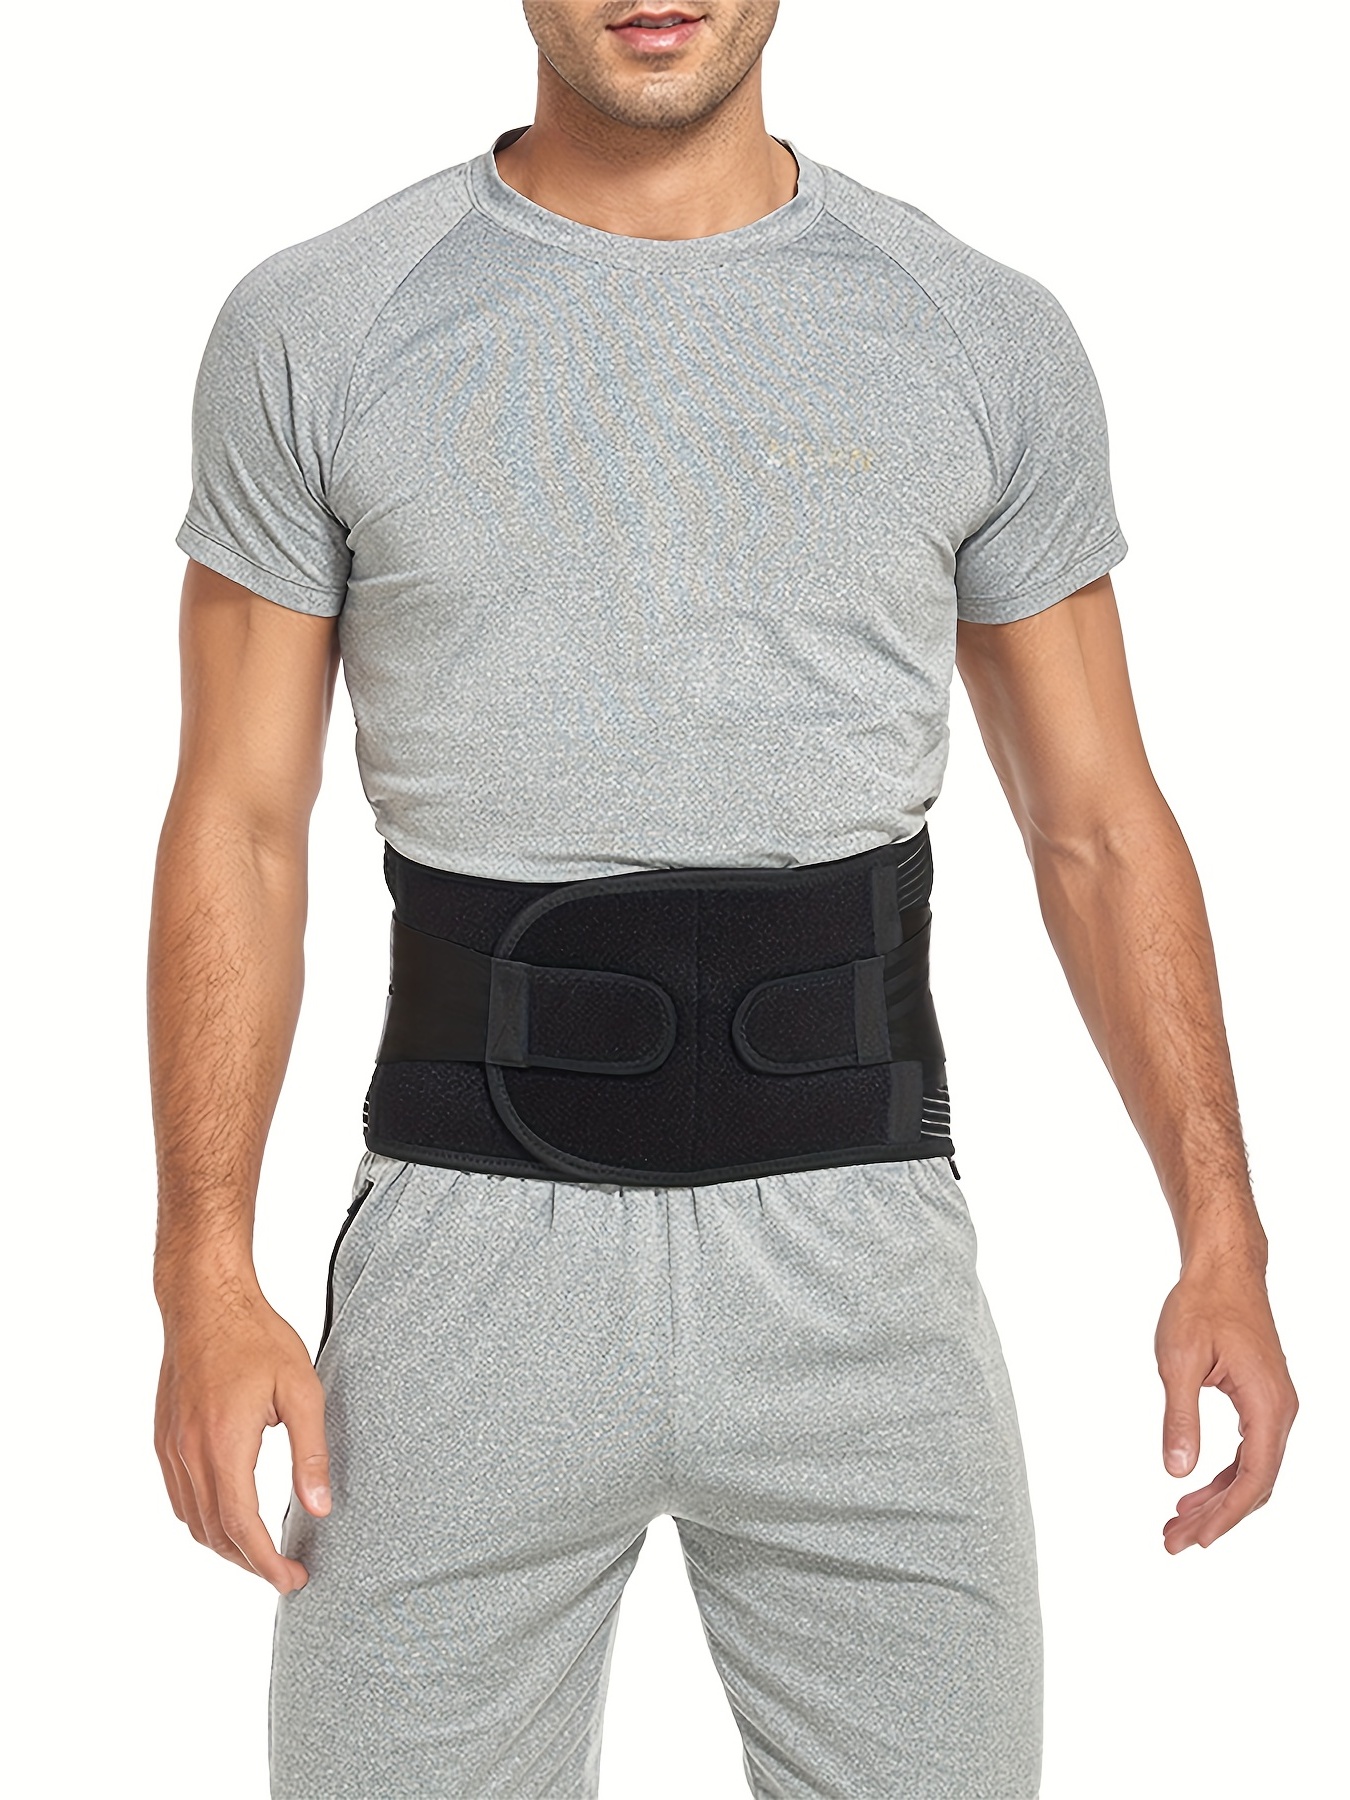 FREETOO Back Brace for Lower Back Pain, Breathable Back Support